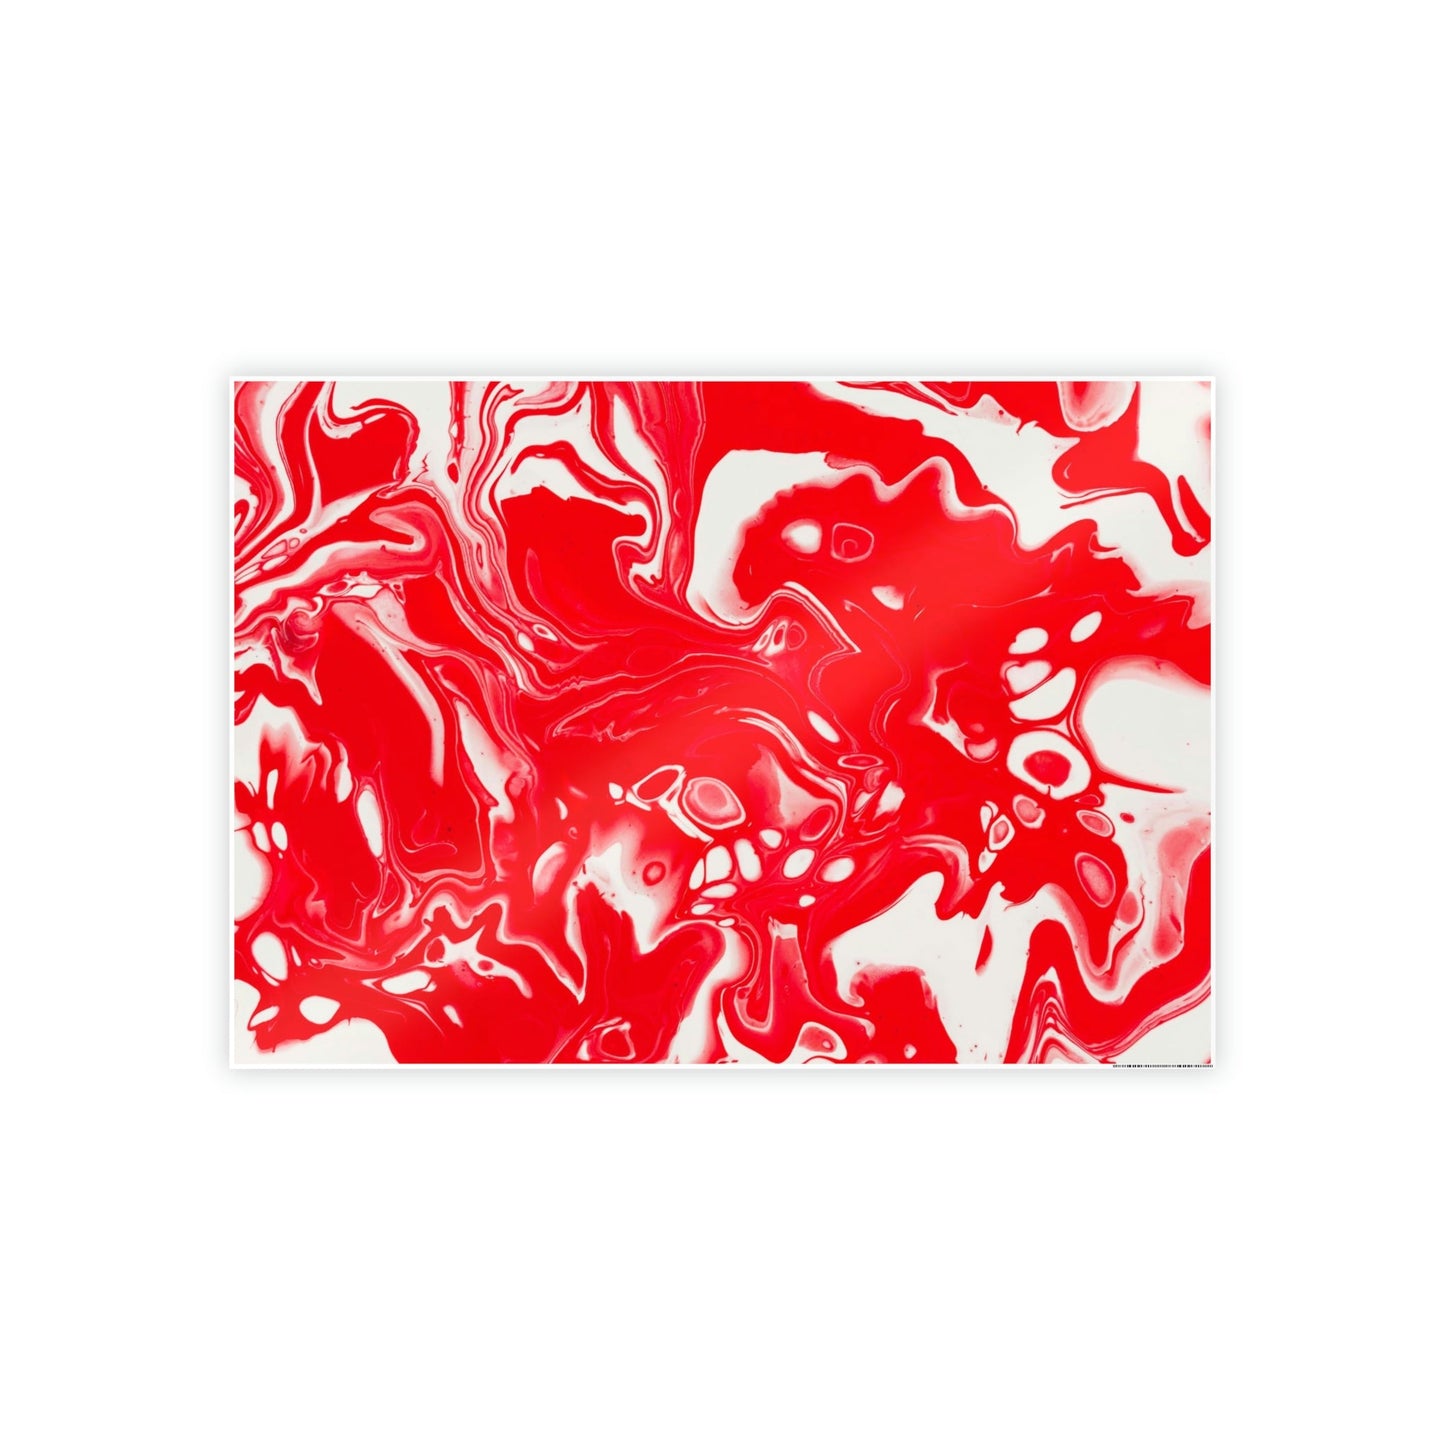 Capturing Emotion in Art: Red Abstract Prints and Canvas Wall Art